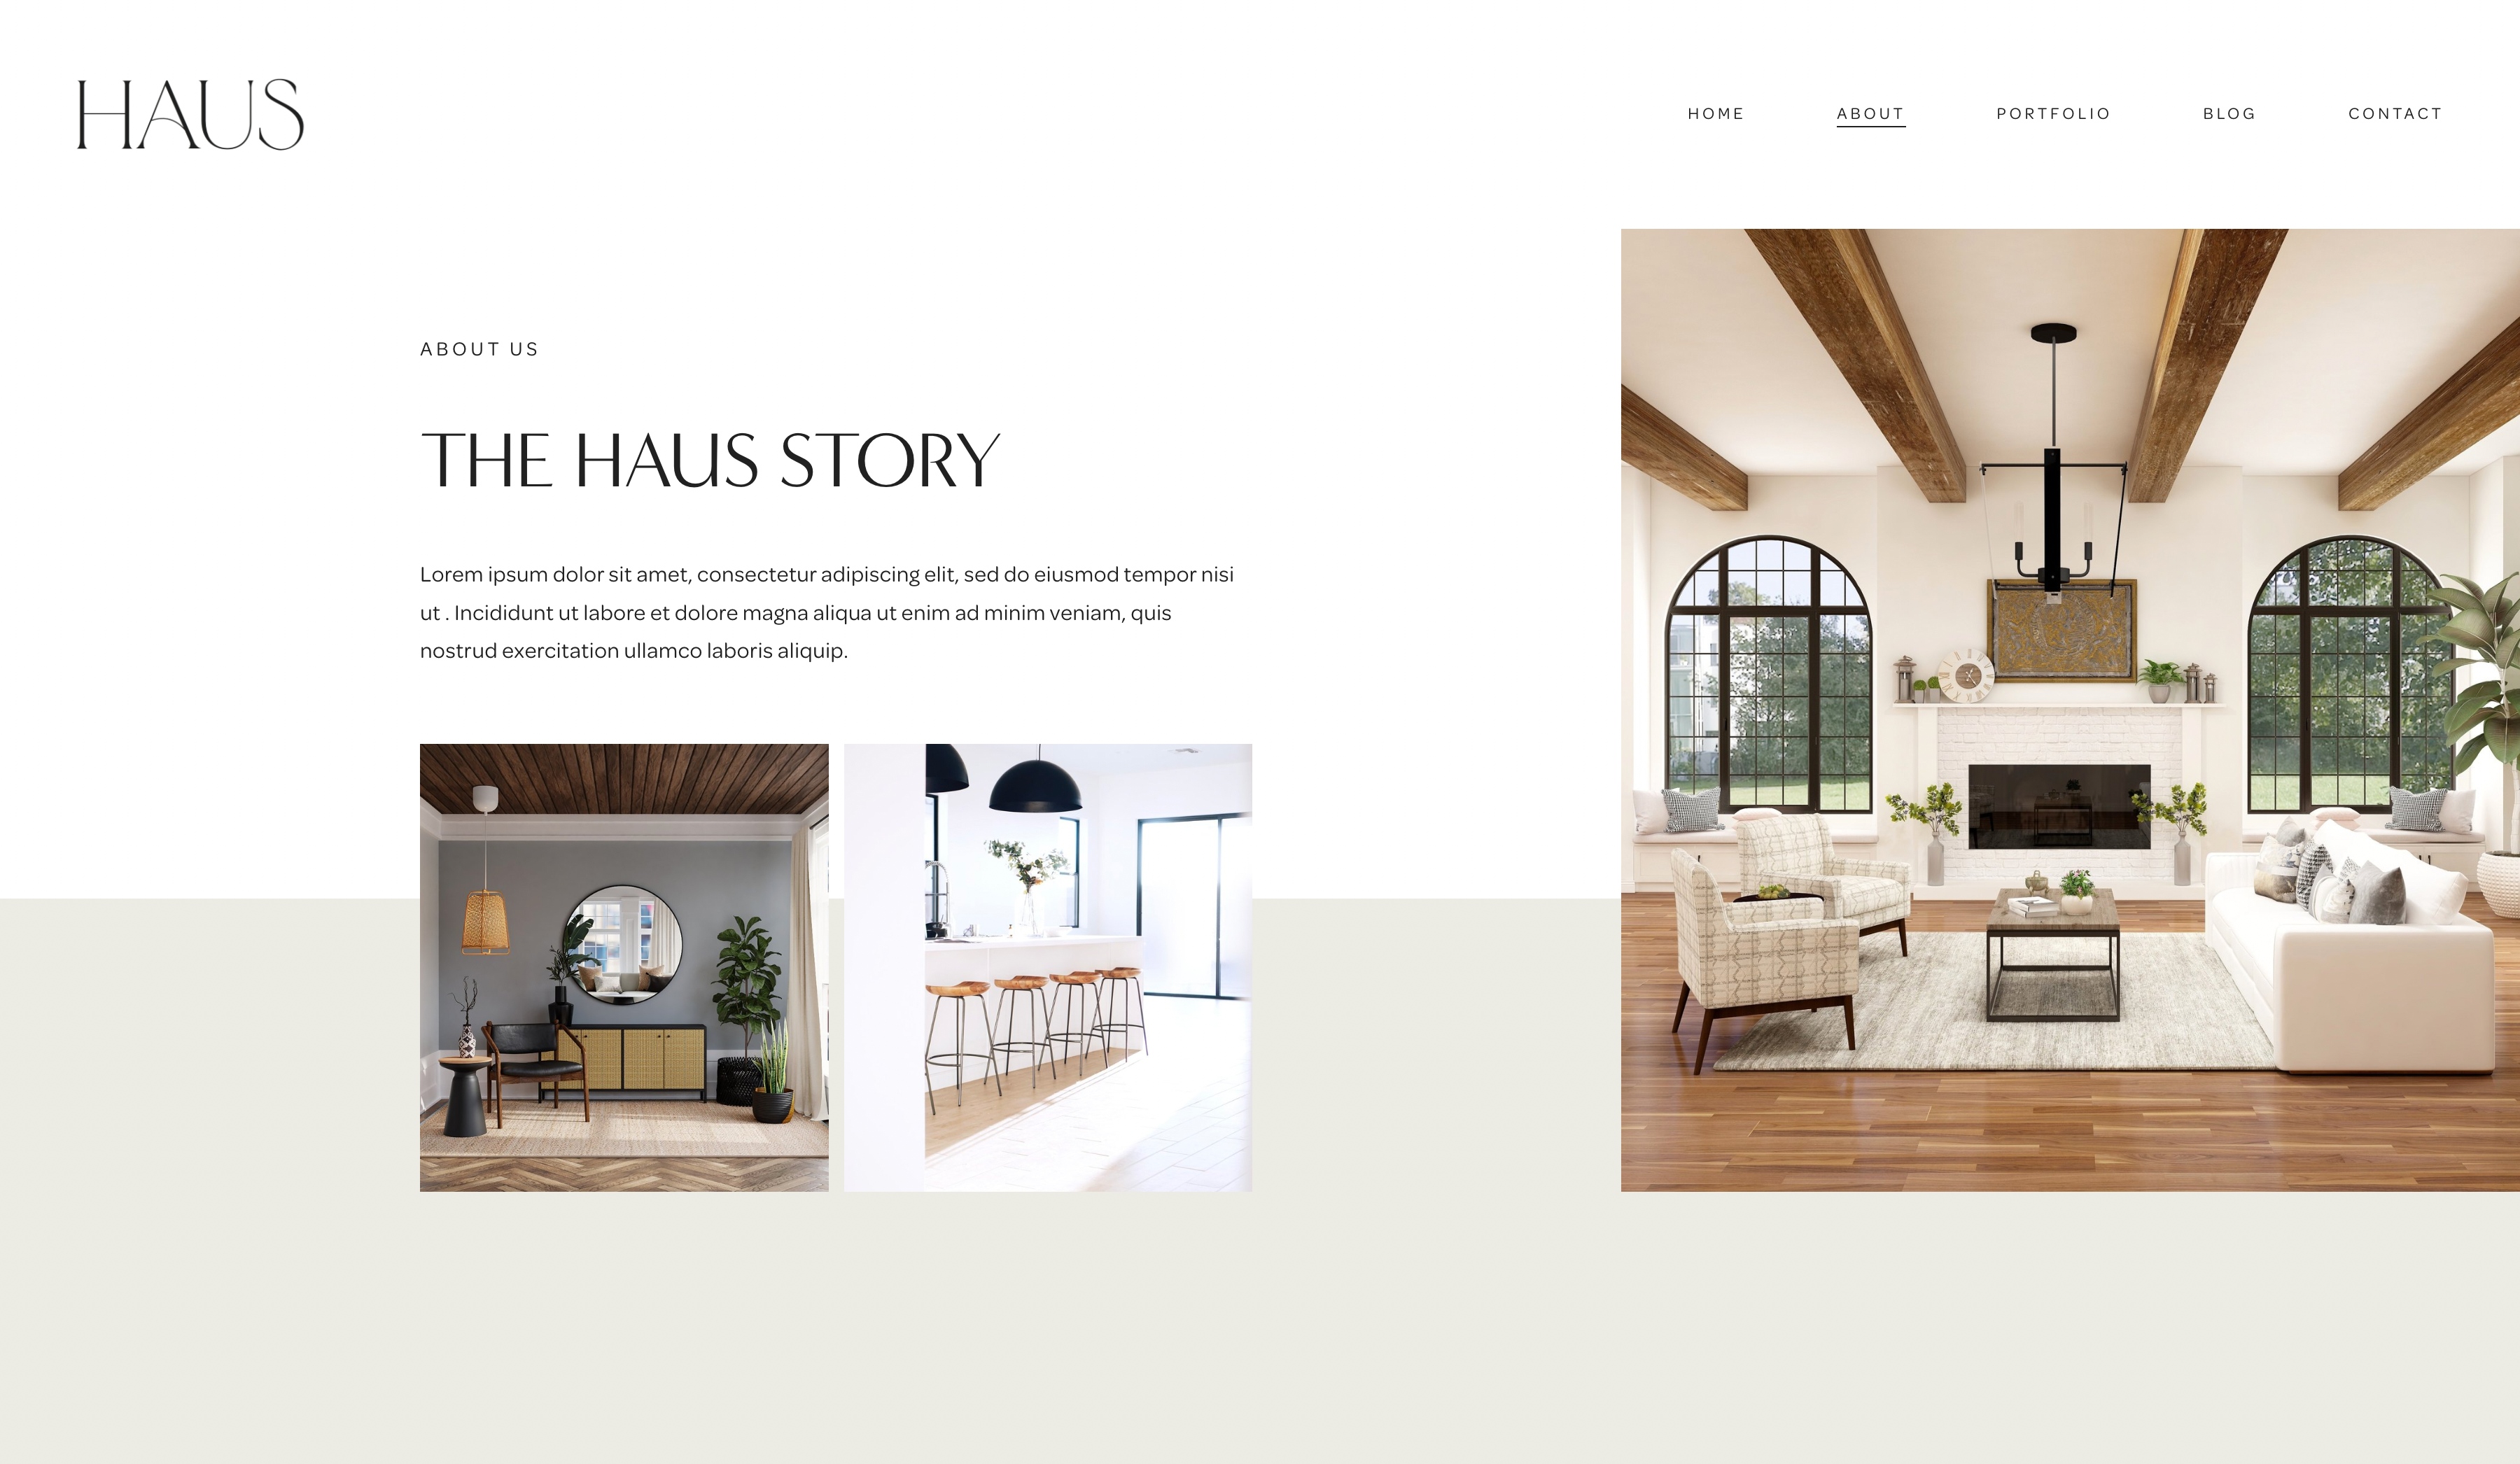 About_Company-HAUS-best-squarespace-website-template-architechs-uk